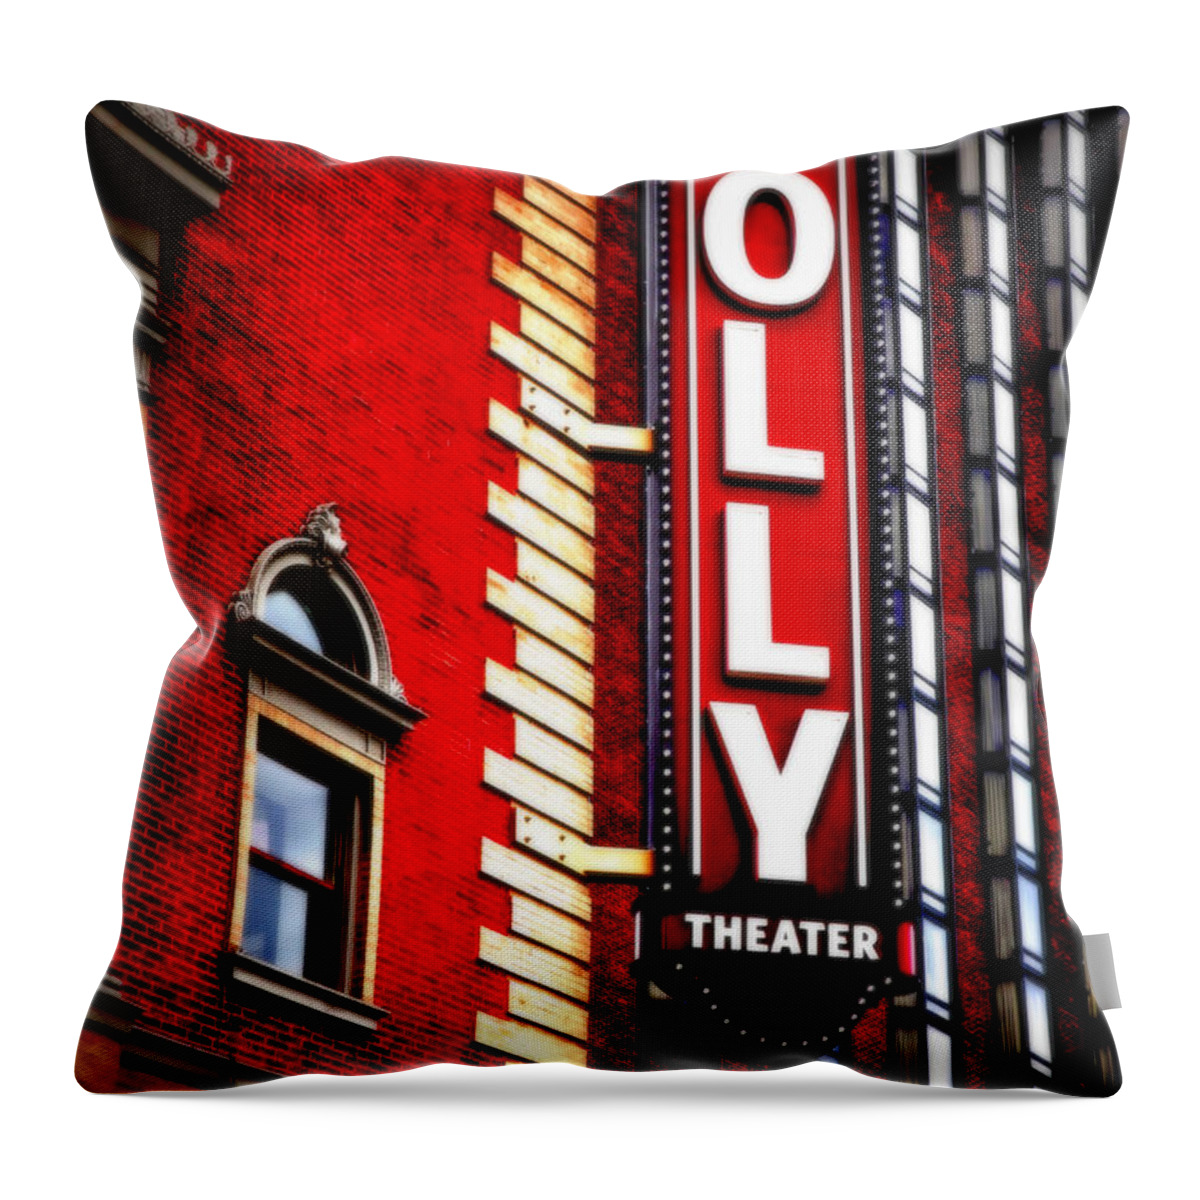 Folly Throw Pillow featuring the photograph Folly Theater by Lynn Sprowl